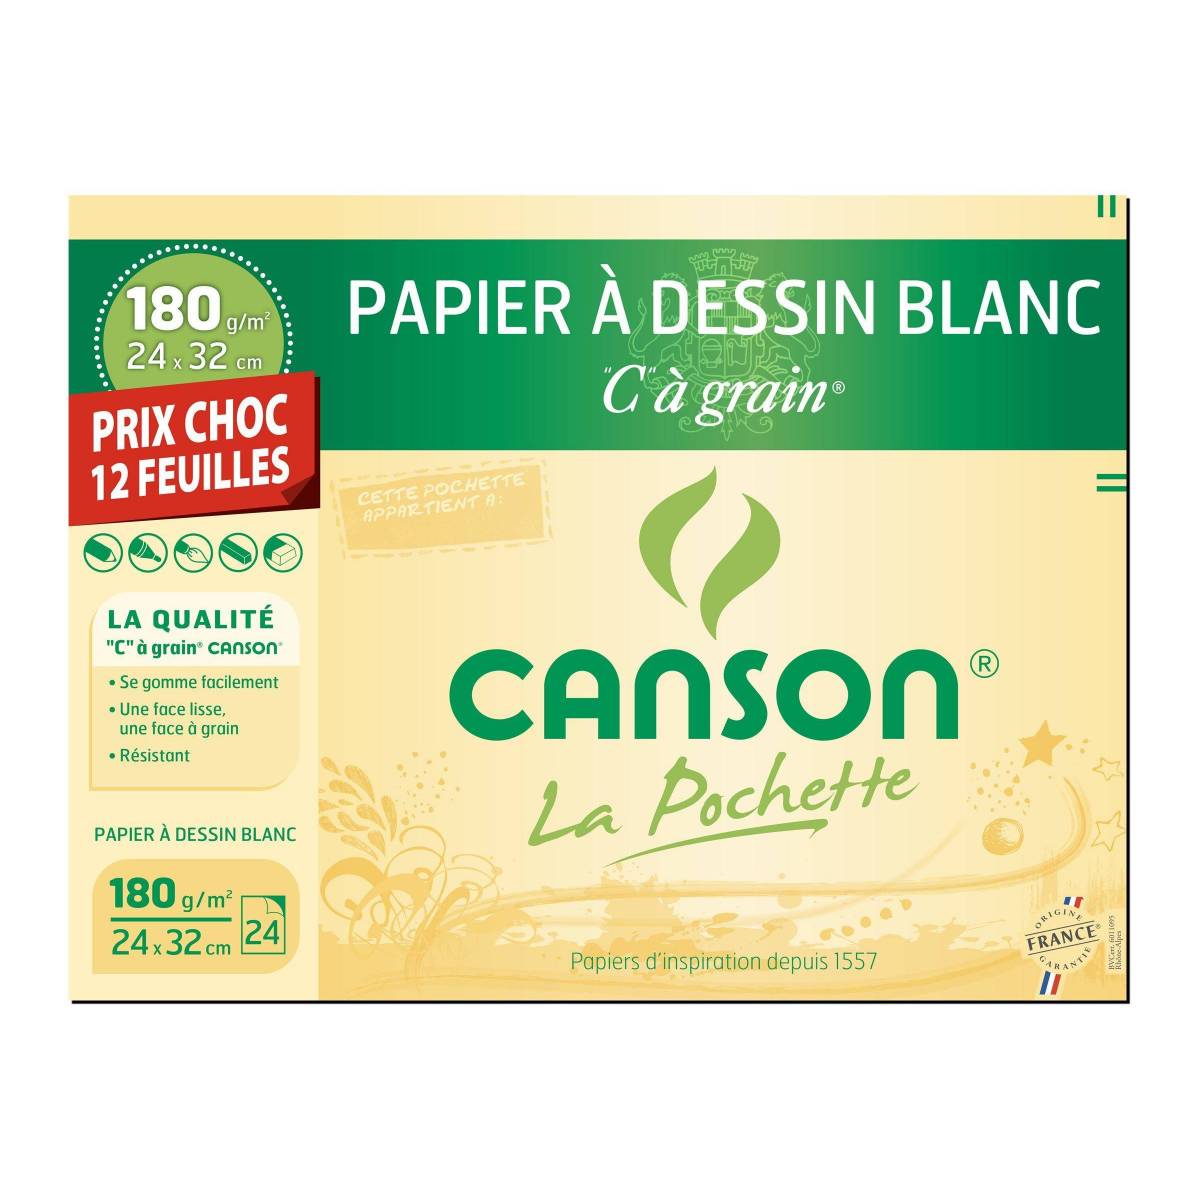 12 White drawing papers CANSON C grain 24 X 32 CM 180g